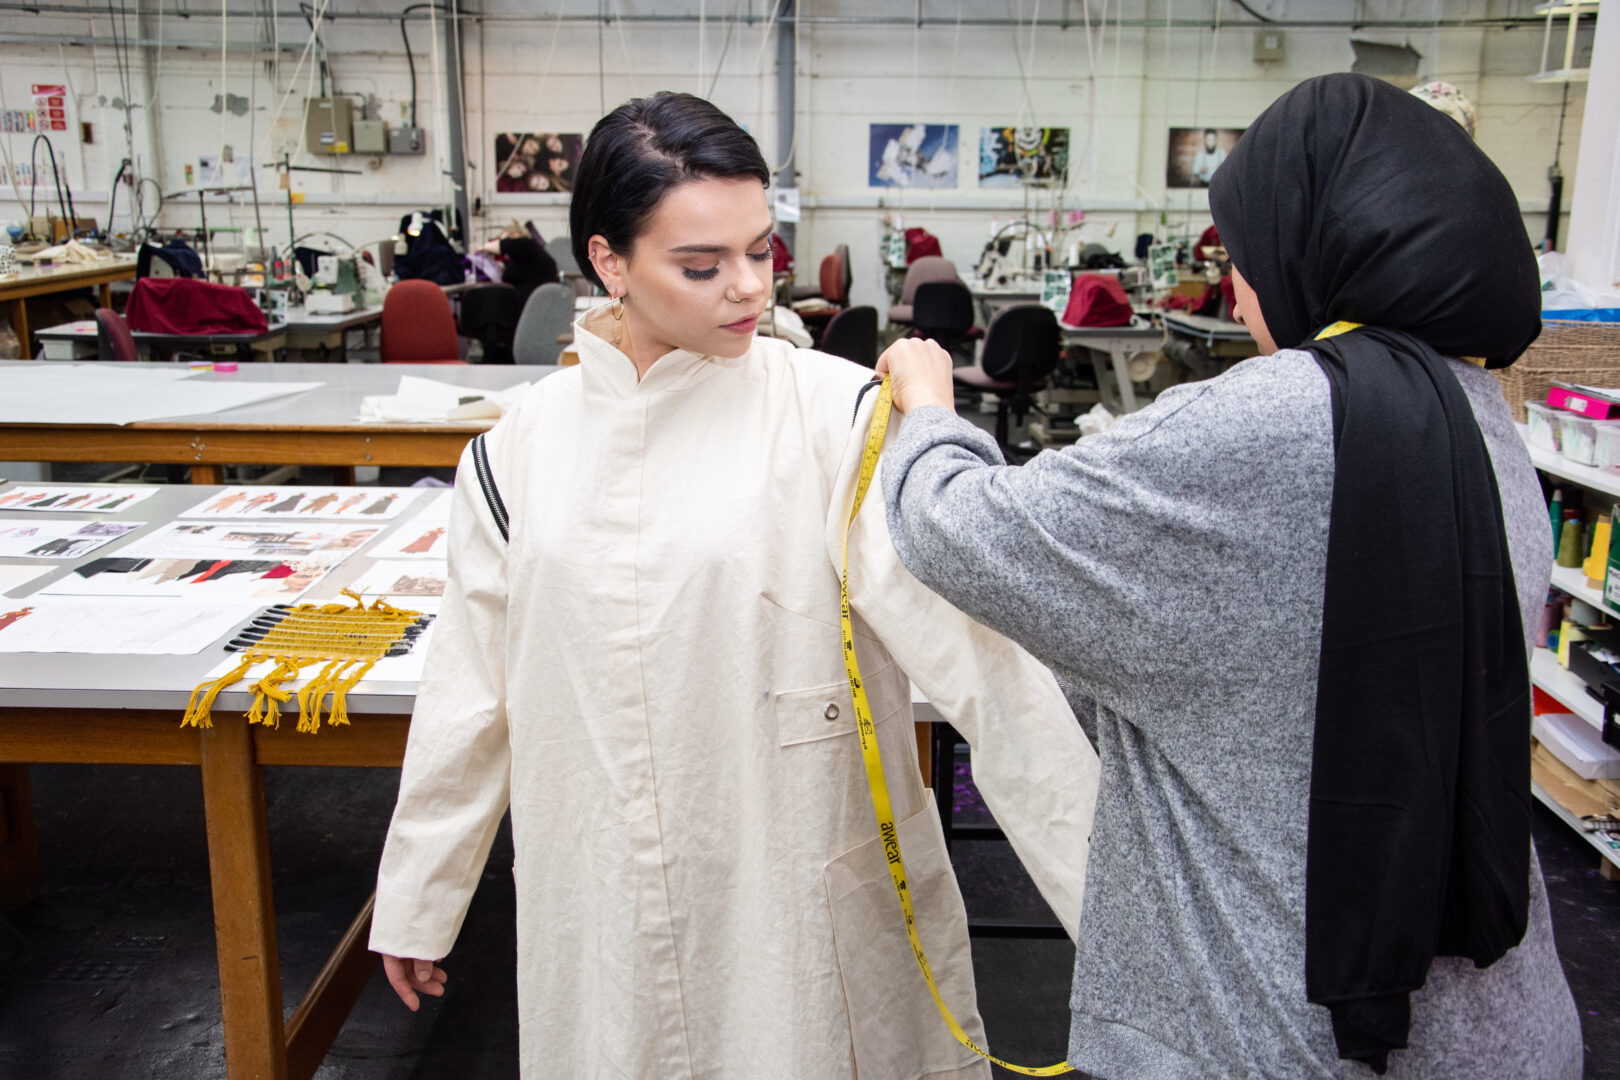 fashion student fitting sleeves onto a piece of clothing